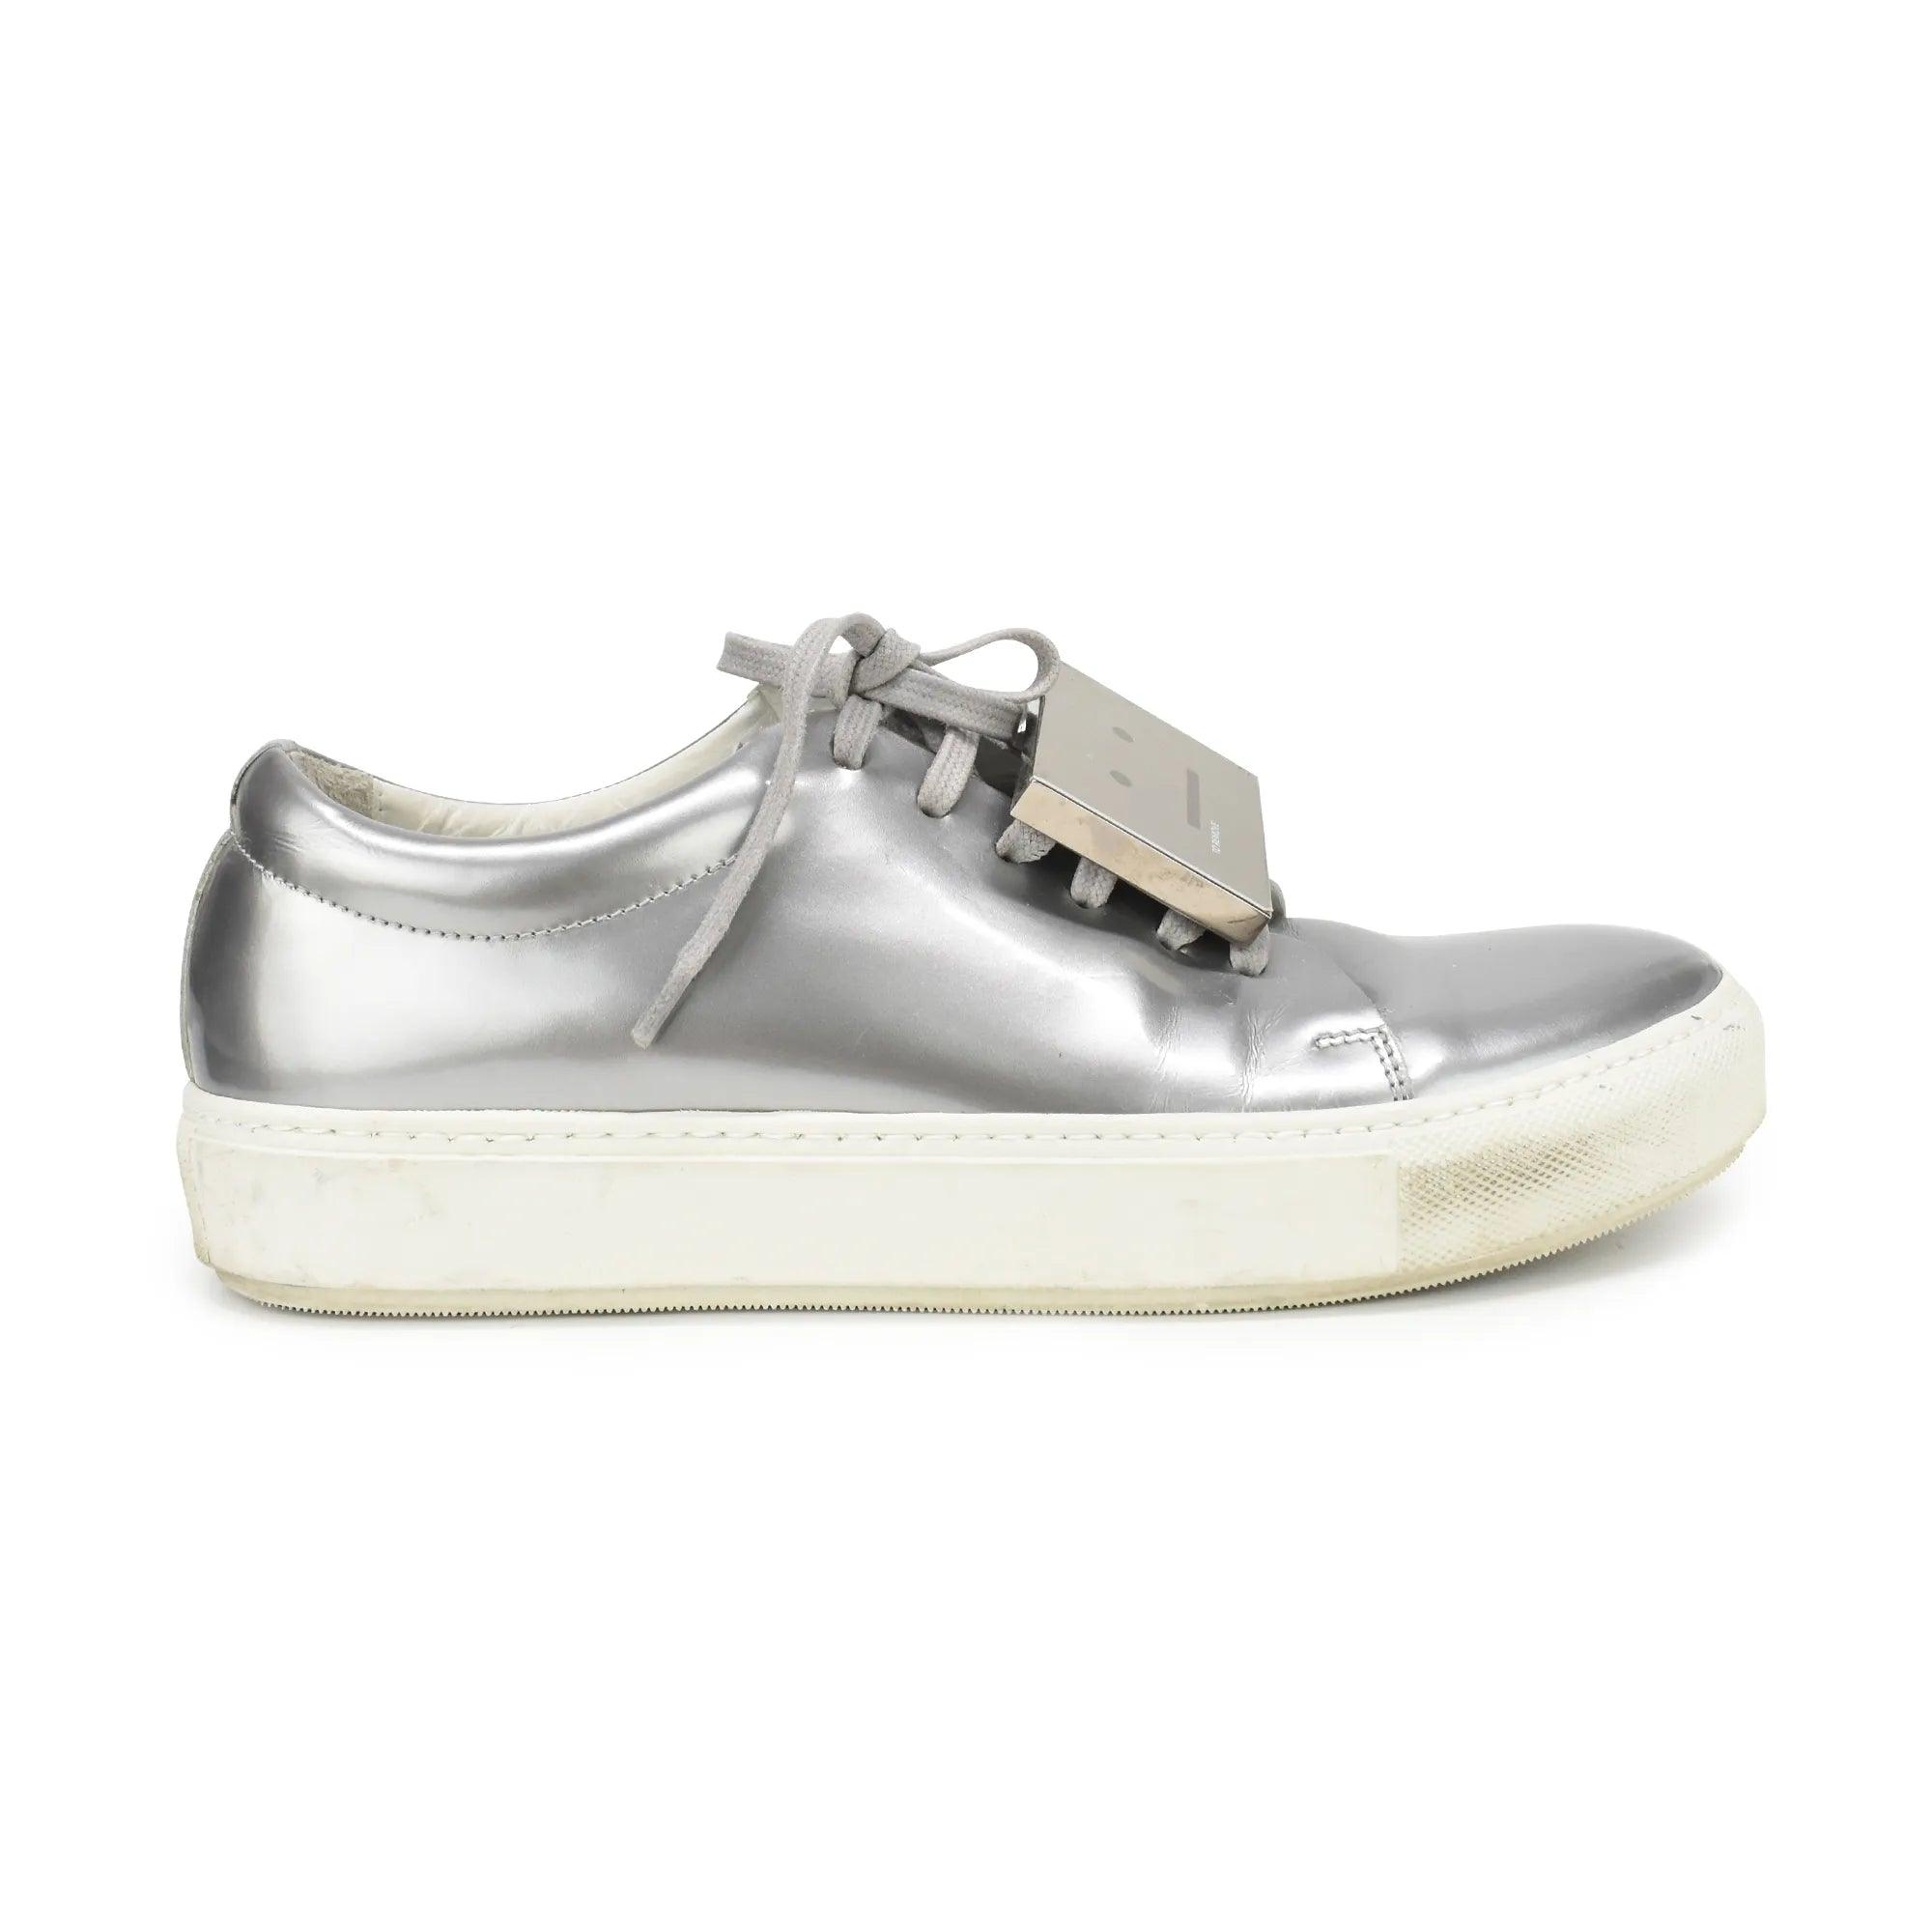 Acne Sneakers - Women's 39 - Fashionably Yours